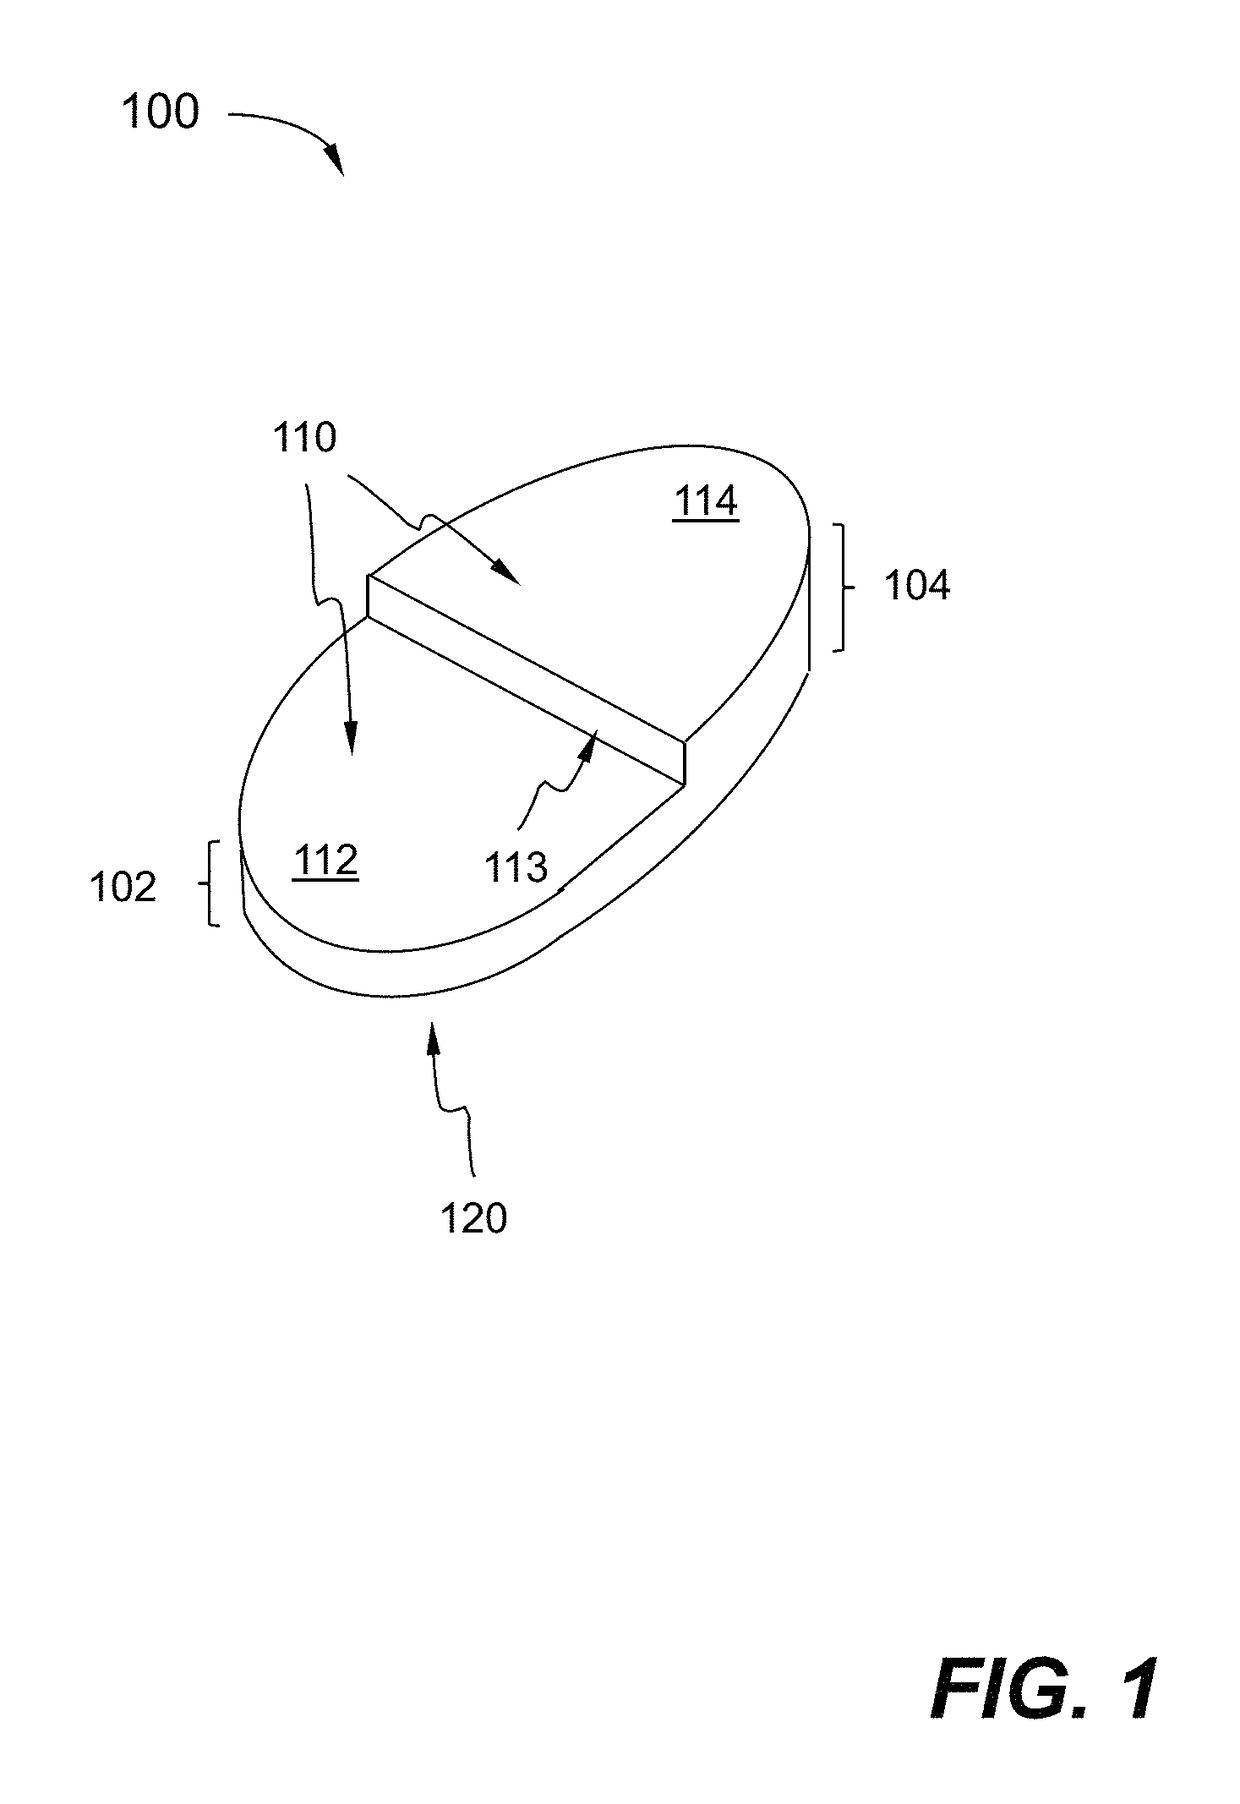 Apparatus providing teeth location guide for use with single-reed woodwind instruments